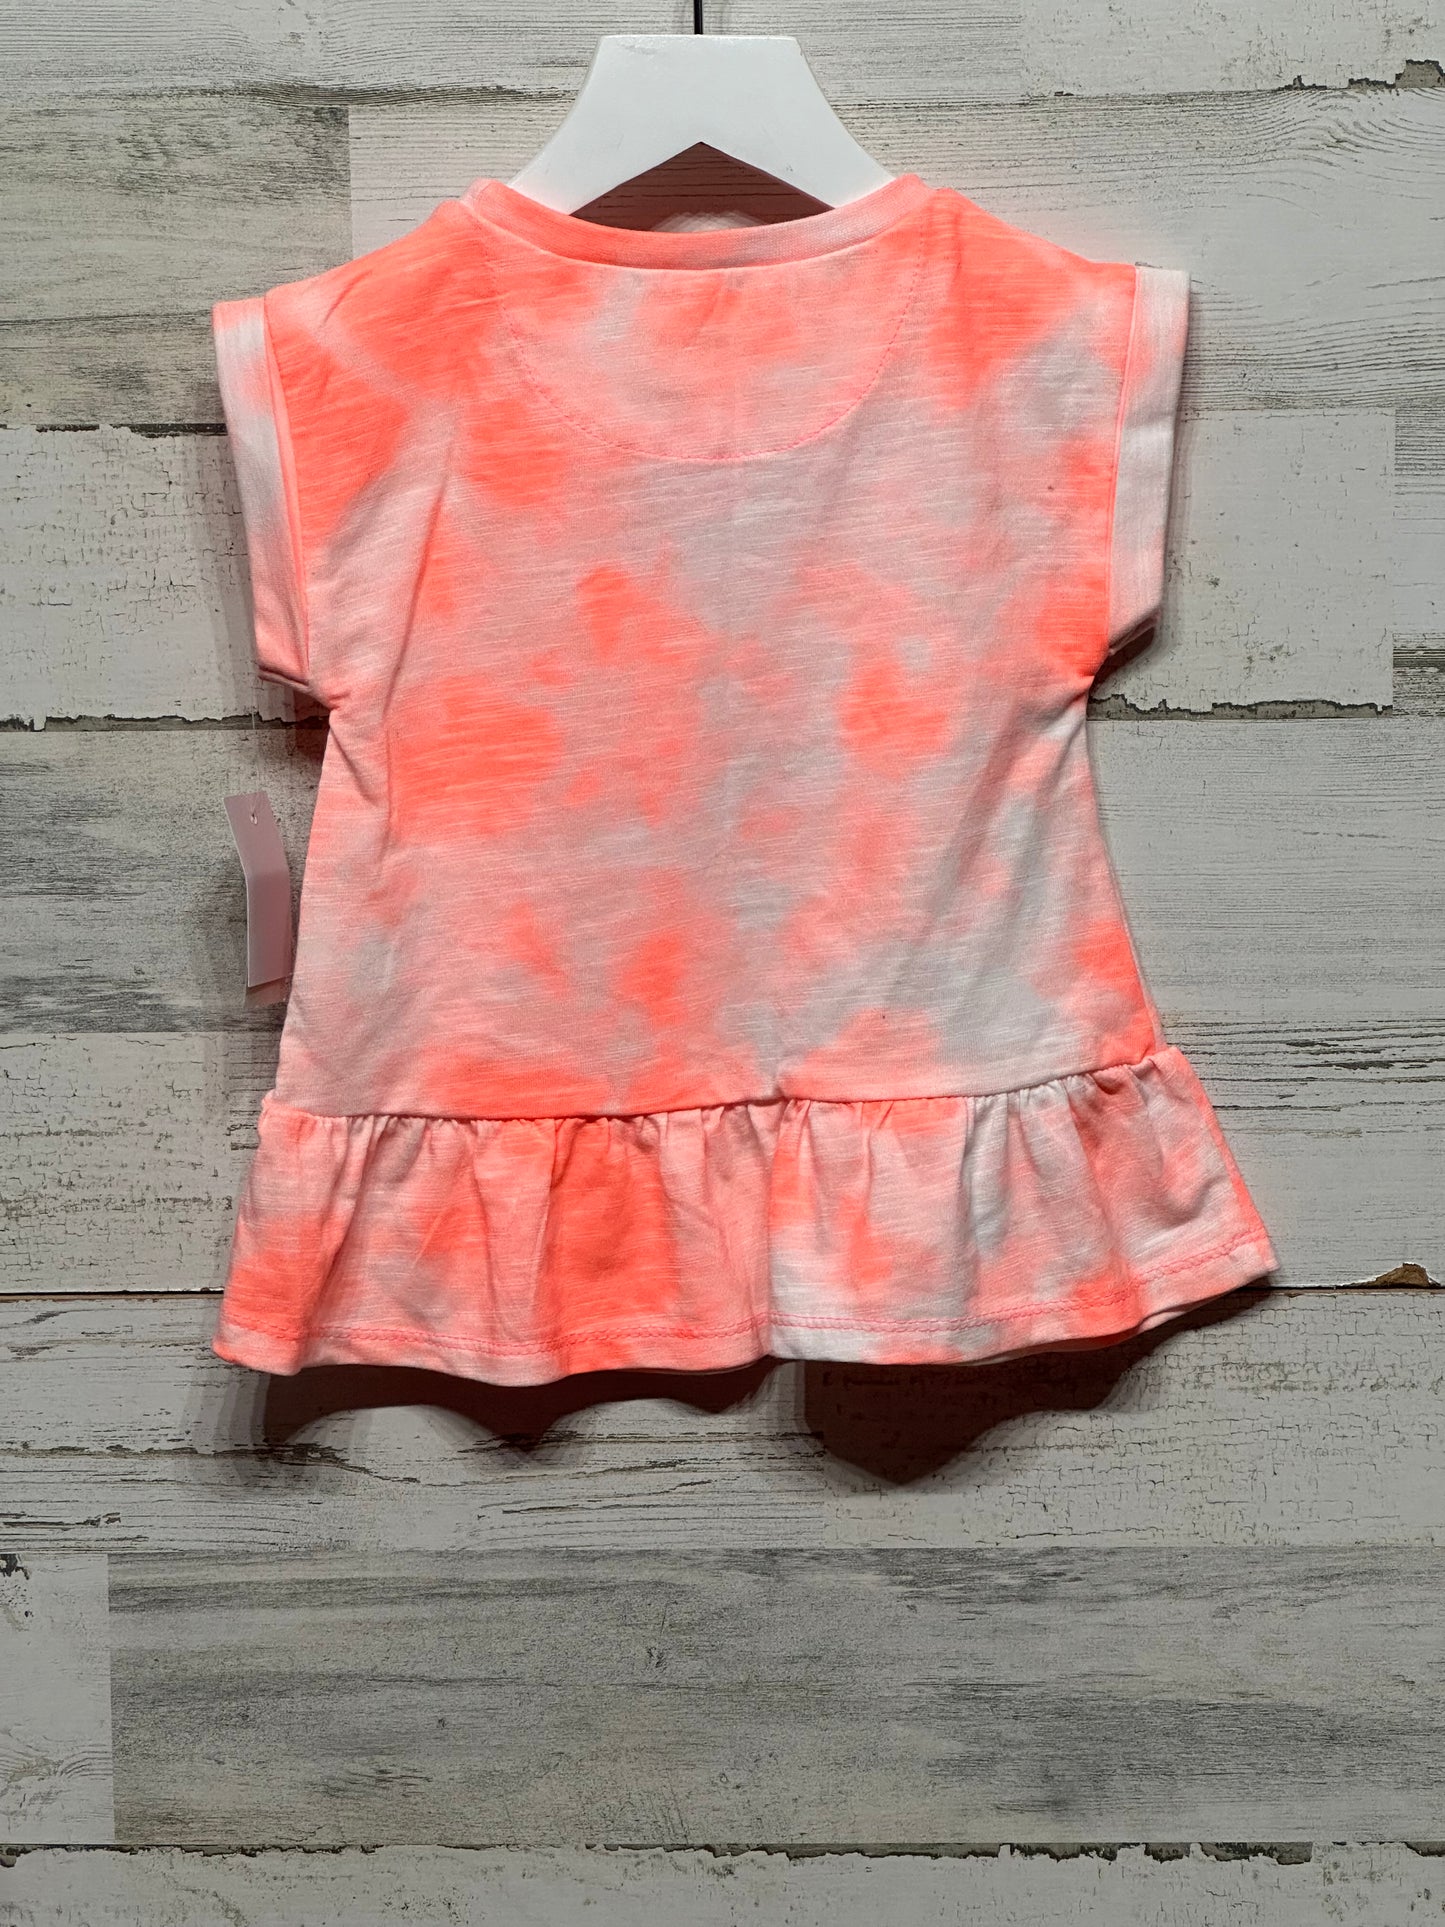 Girls Size 3t Hudson Bright Tie Dye Shirt - New With Tags